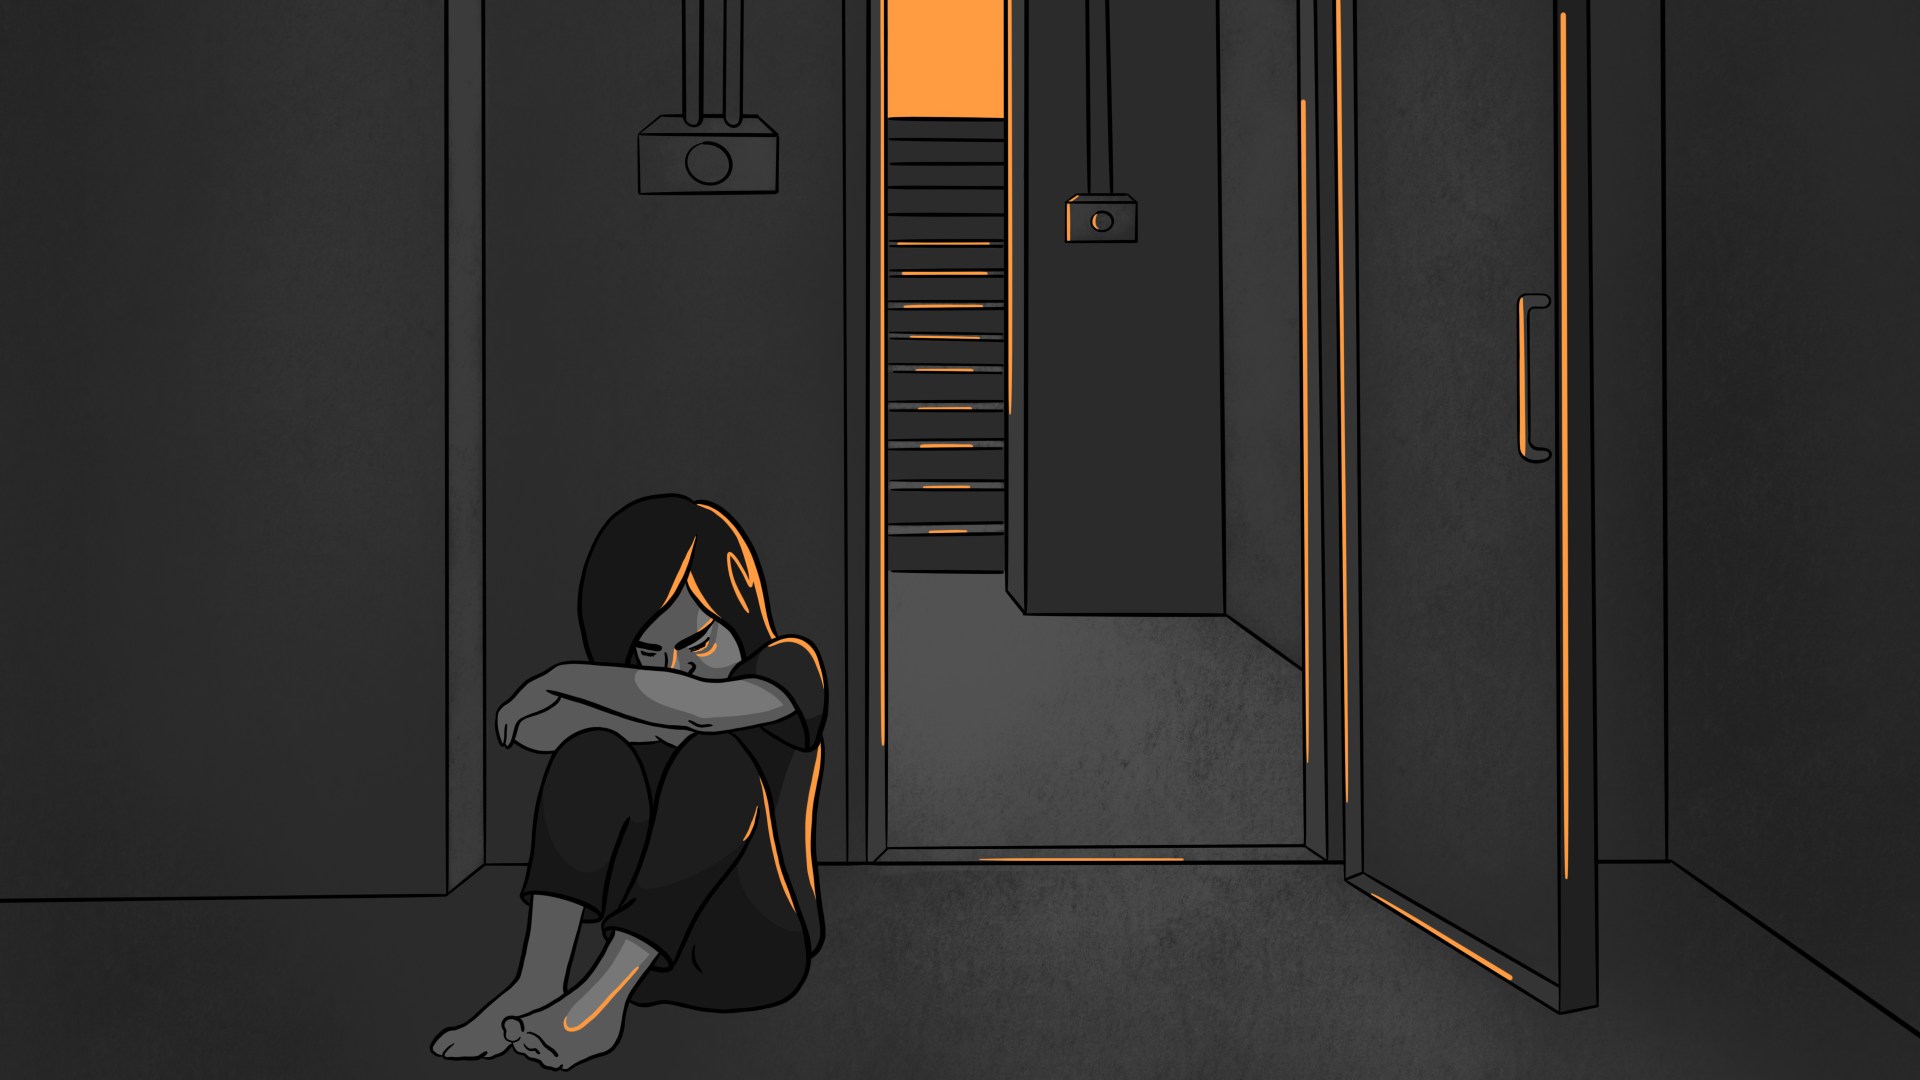 An illustration of a child sitting on the floor in a dark room against a wall with her knees up and her arms resting on her knees. She is next to a door that is open.